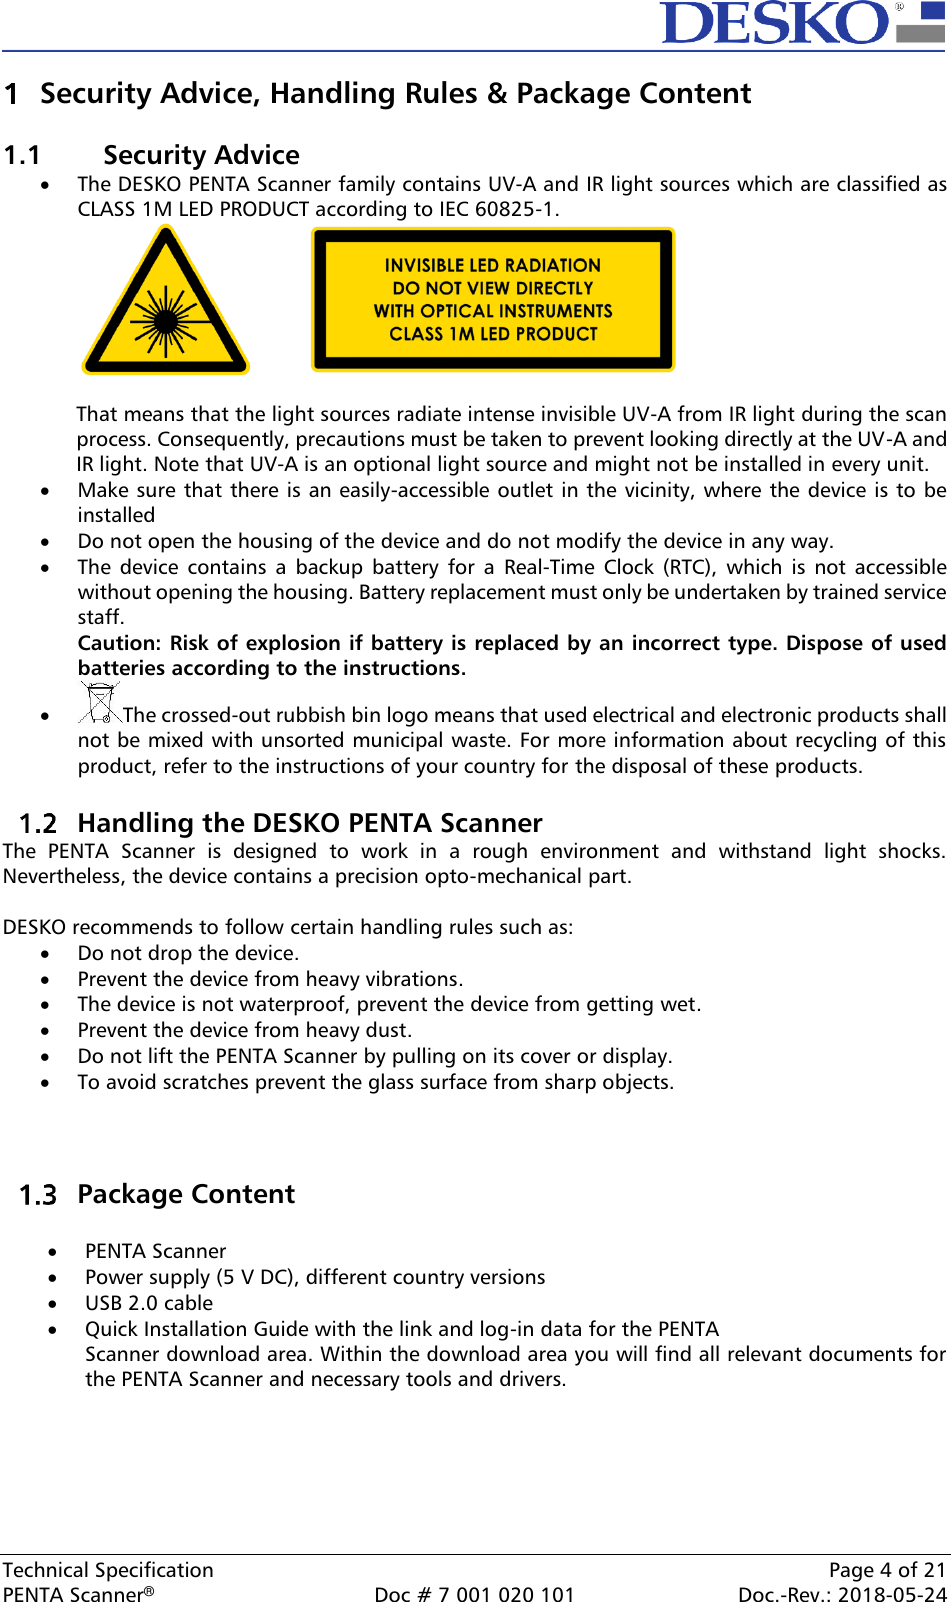  Technical Specification    Page 4 of 21 PENTA Scanner®  Doc # 7 001 020 101  Doc.-Rev.: 2018-05-24  Security Advice, Handling Rules &amp; Package Content  1.1  Security Advice • The DESKO PENTA Scanner family contains UV-A and IR light sources which are classified as CLASS 1M LED PRODUCT according to IEC 60825-1.     That means that the light sources radiate intense invisible UV-A from IR light during the scan process. Consequently, precautions must be taken to prevent looking directly at the UV-A and IR light. Note that UV-A is an optional light source and might not be installed in every unit.  • Make sure that there is an easily-accessible outlet in the vicinity, where the device is to be installed • Do not open the housing of the device and do not modify the device in any way.  • The  device  contains  a  backup  battery  for  a  Real-Time  Clock (RTC),  which  is  not  accessible without opening the housing. Battery replacement must only be undertaken by trained service staff. Caution: Risk of explosion if battery is replaced by an incorrect type. Dispose of used batteries according to the instructions. • The crossed-out rubbish bin logo means that used electrical and electronic products shall not be mixed with unsorted municipal waste. For more information about recycling of this product, refer to the instructions of your country for the disposal of these products.   Handling the DESKO PENTA Scanner The  PENTA  Scanner  is  designed  to  work  in  a  rough  environment  and  withstand  light  shocks. Nevertheless, the device contains a precision opto-mechanical part.  DESKO recommends to follow certain handling rules such as: • Do not drop the device. • Prevent the device from heavy vibrations. • The device is not waterproof, prevent the device from getting wet. • Prevent the device from heavy dust. • Do not lift the PENTA Scanner by pulling on its cover or display. • To avoid scratches prevent the glass surface from sharp objects.     Package Content  • PENTA Scanner • Power supply (5 V DC), different country versions • USB 2.0 cable • Quick Installation Guide with the link and log-in data for the PENTA Scanner download area. Within the download area you will find all relevant documents for the PENTA Scanner and necessary tools and drivers.    